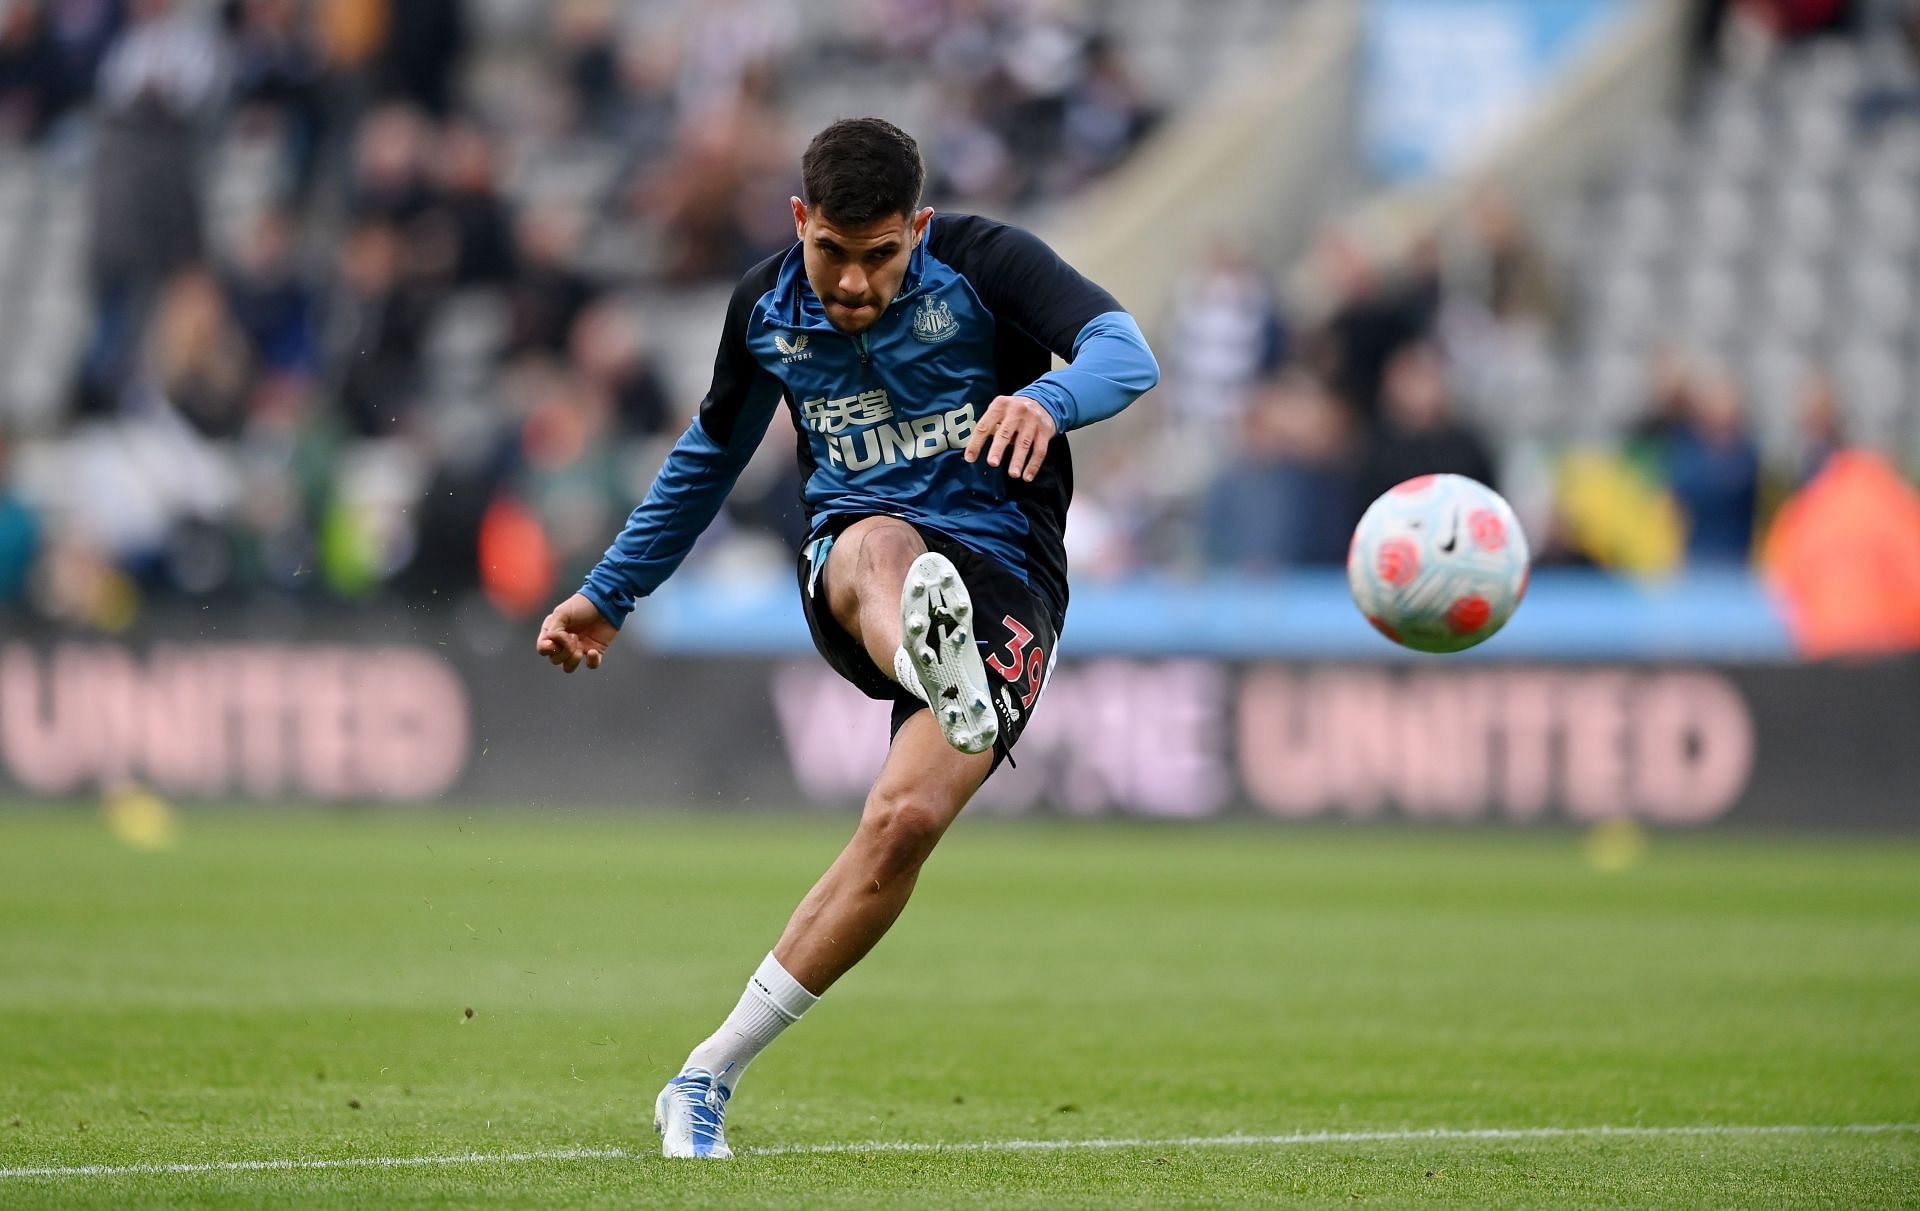 Bruno Guimaraes has been on fire since joining Newcastle United.